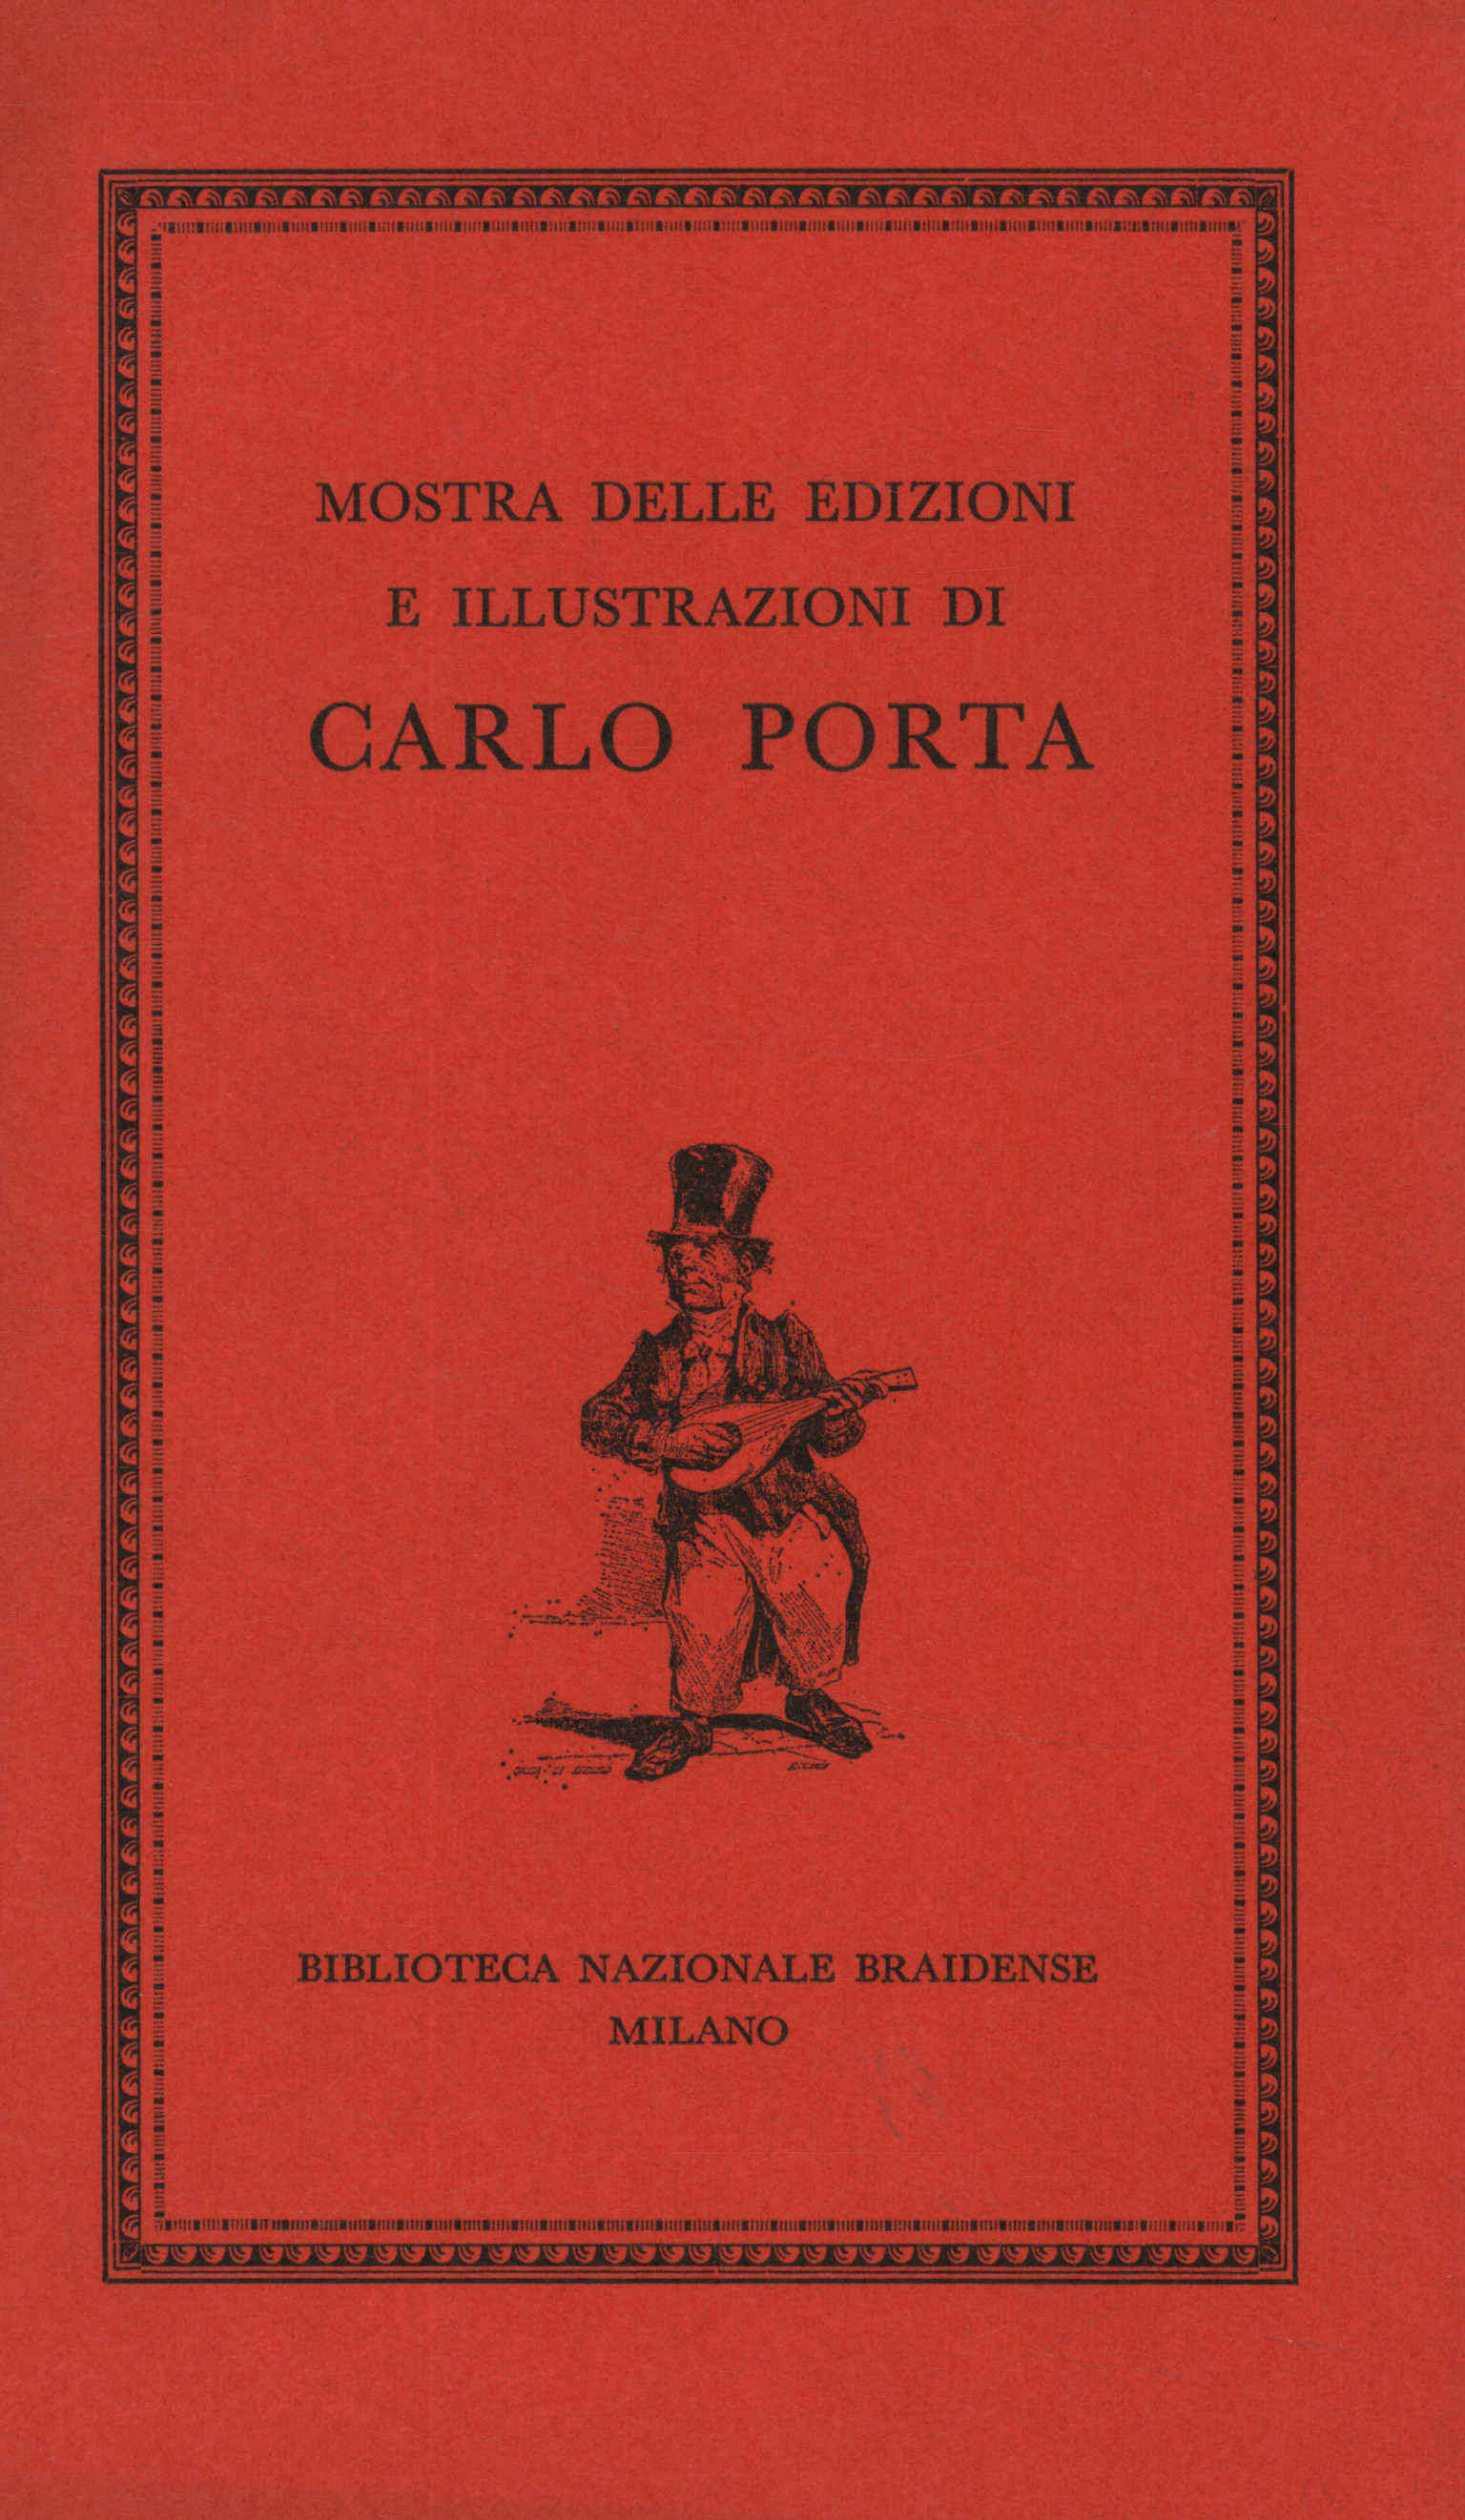 Bibliography of Portian editions